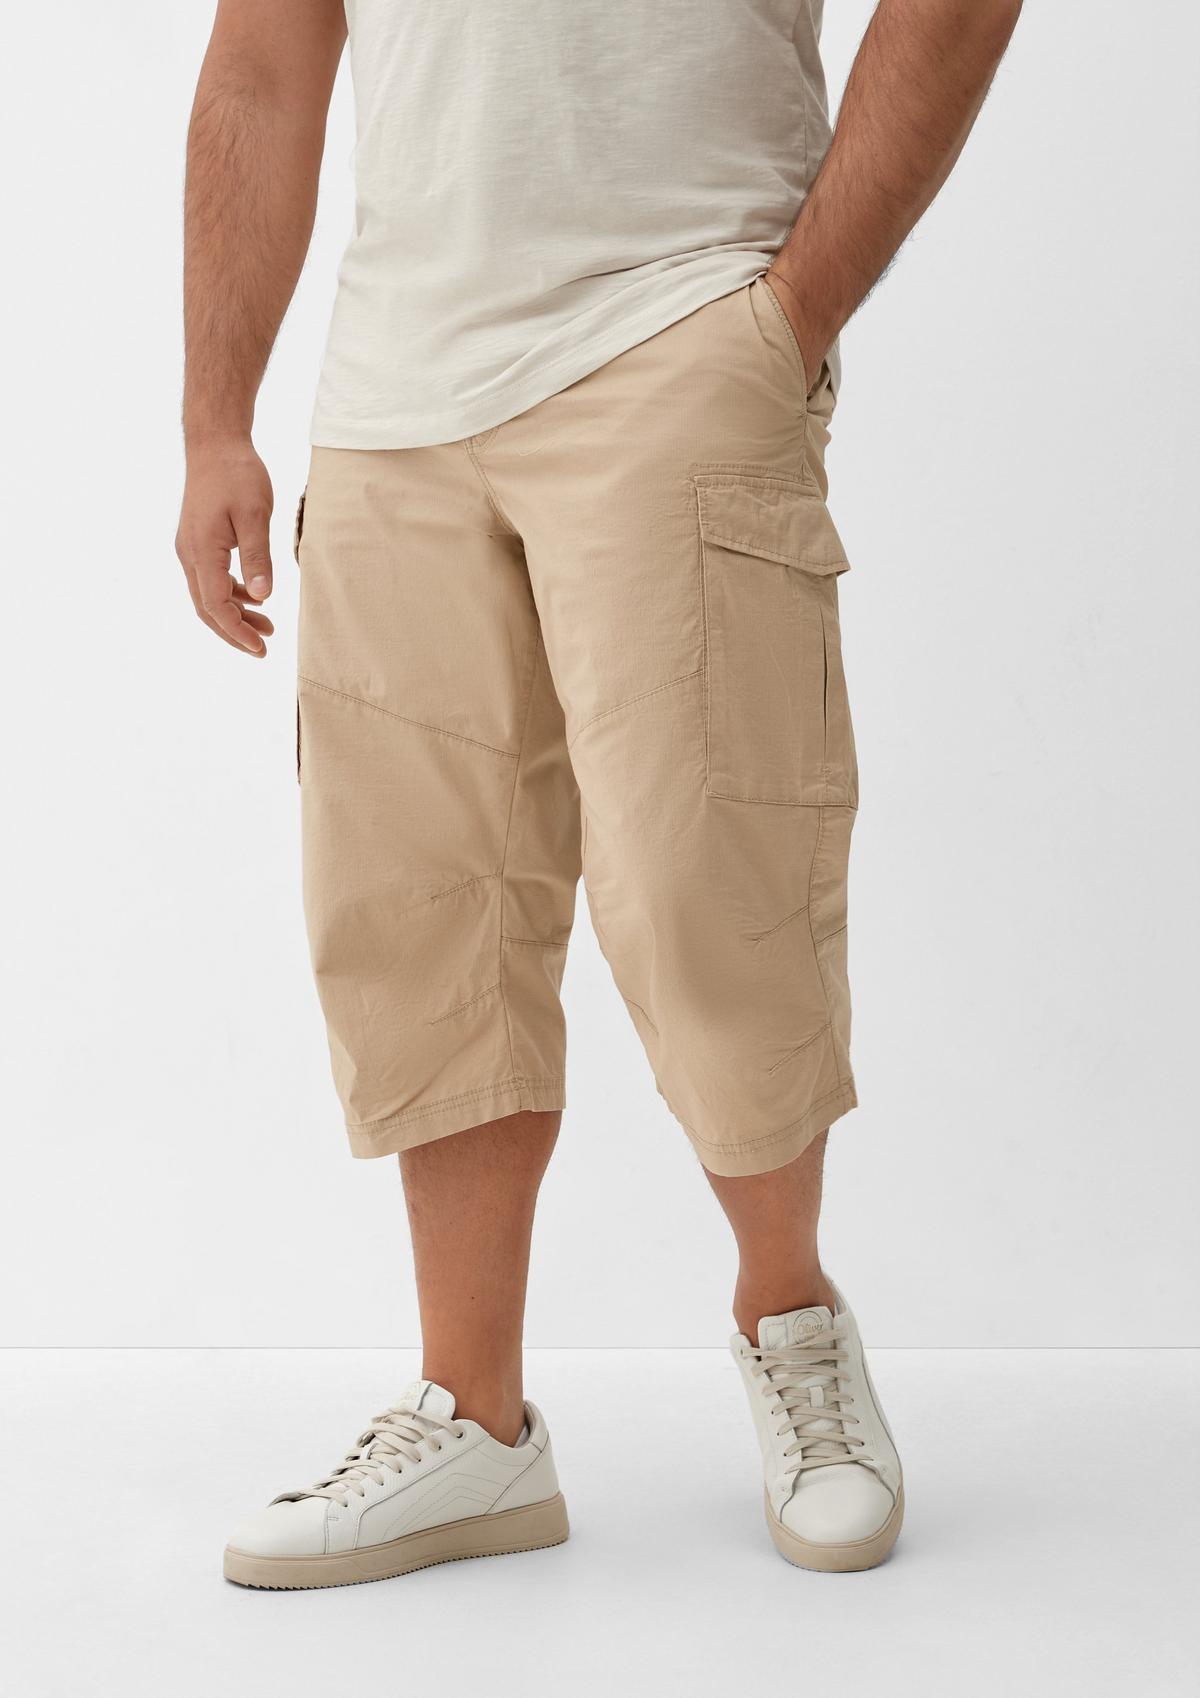 olive with Bermudas Relaxed - fit: pockets cargo